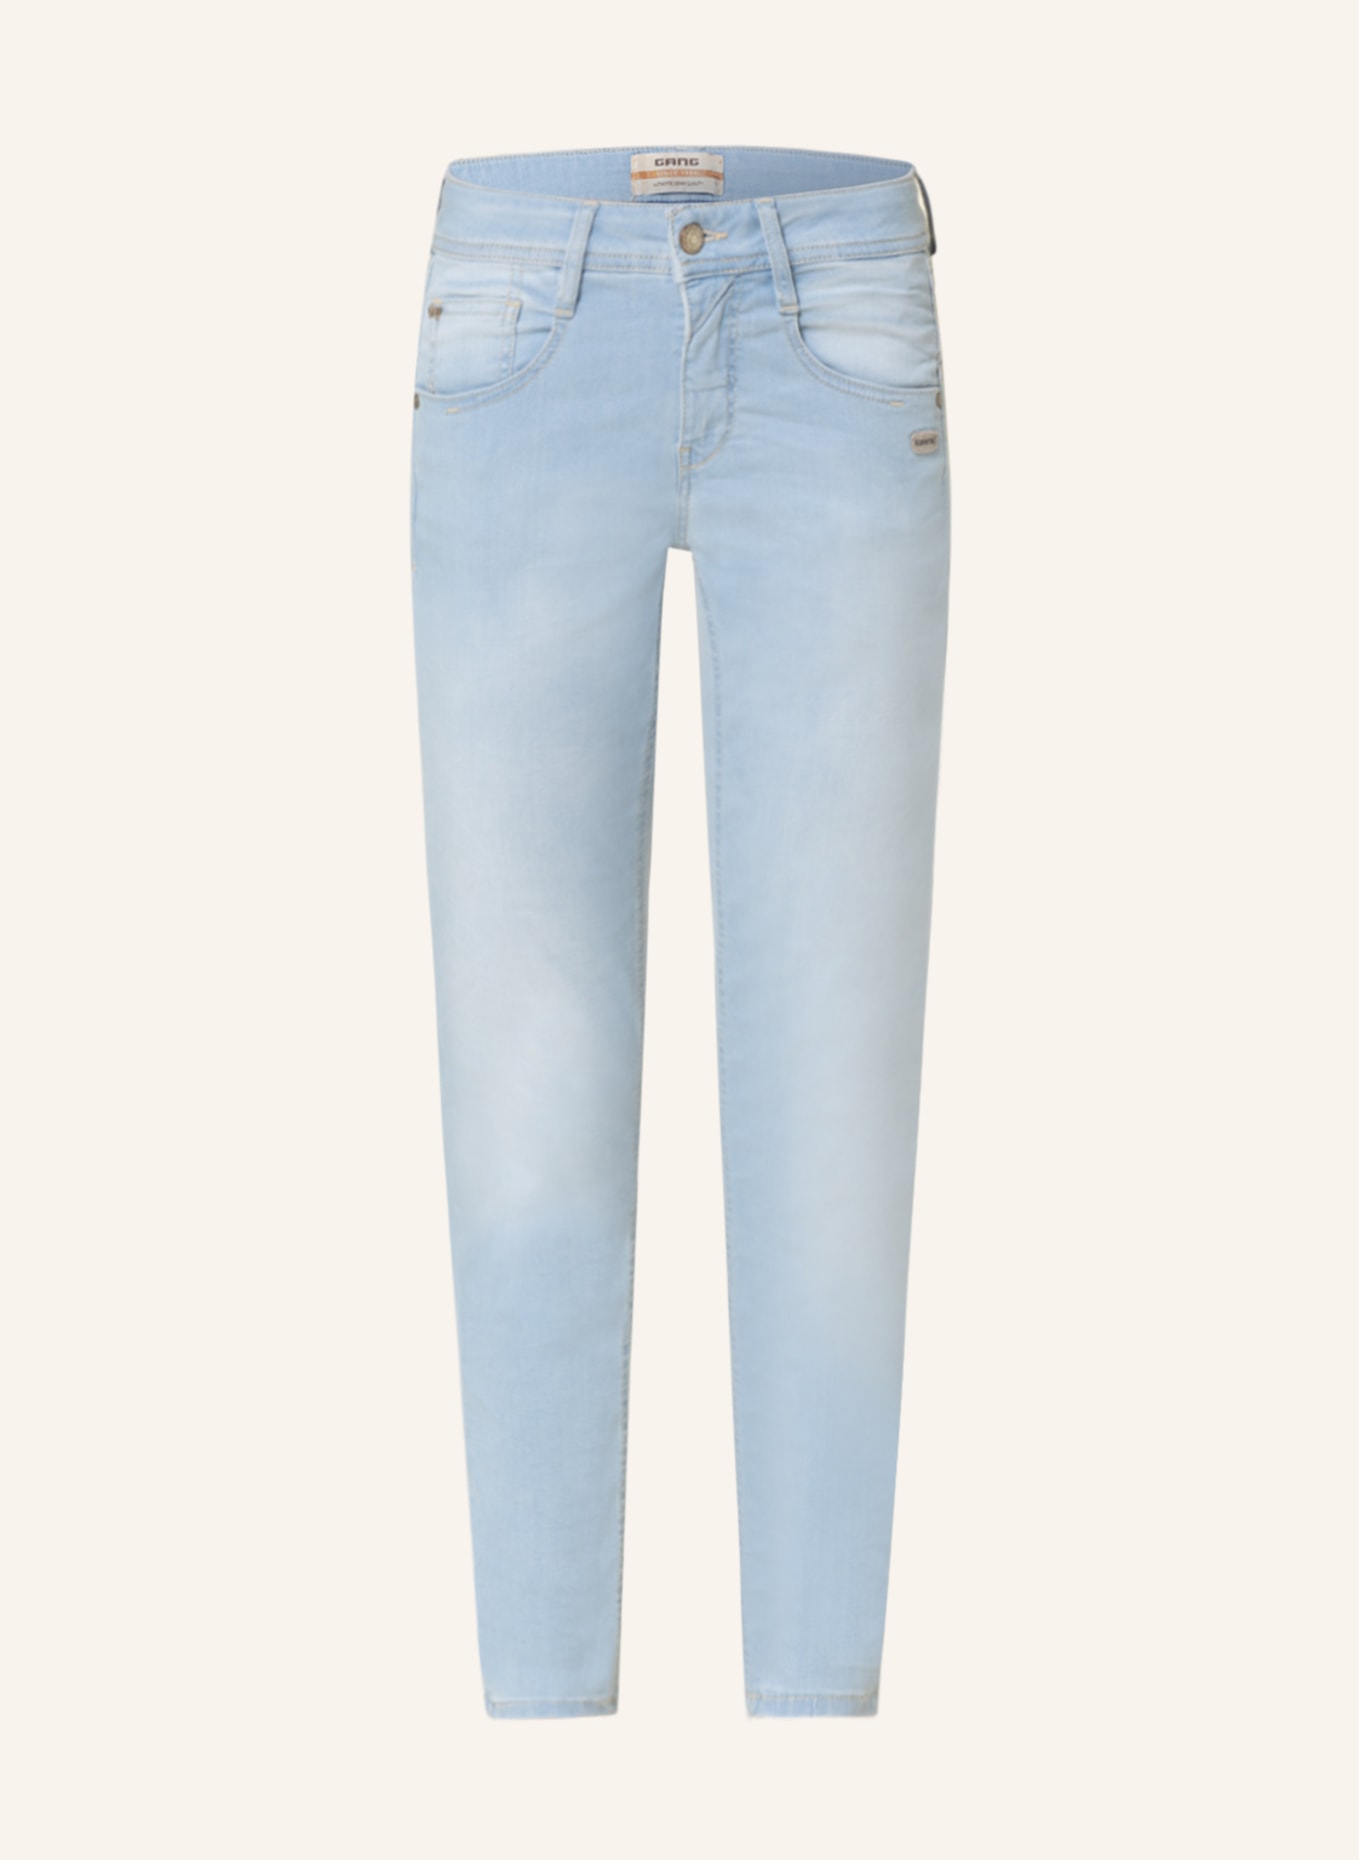 GANG 7/8 jeans AMELIE in 7656 glamour knit